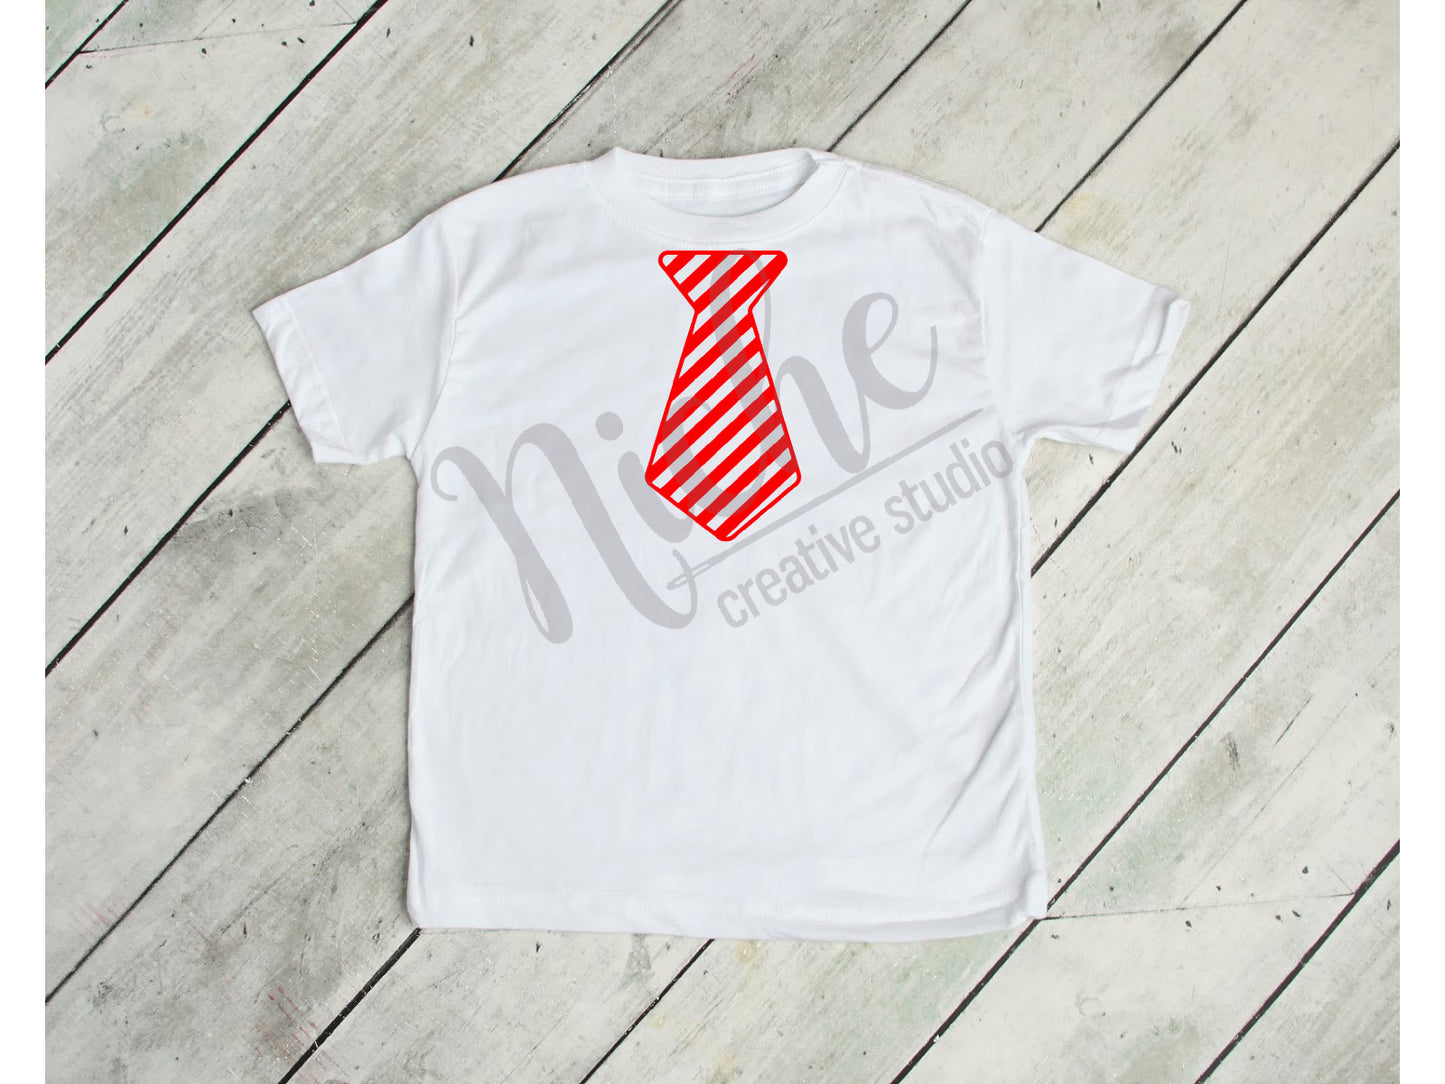 * Christmas Tie - Striped Decal